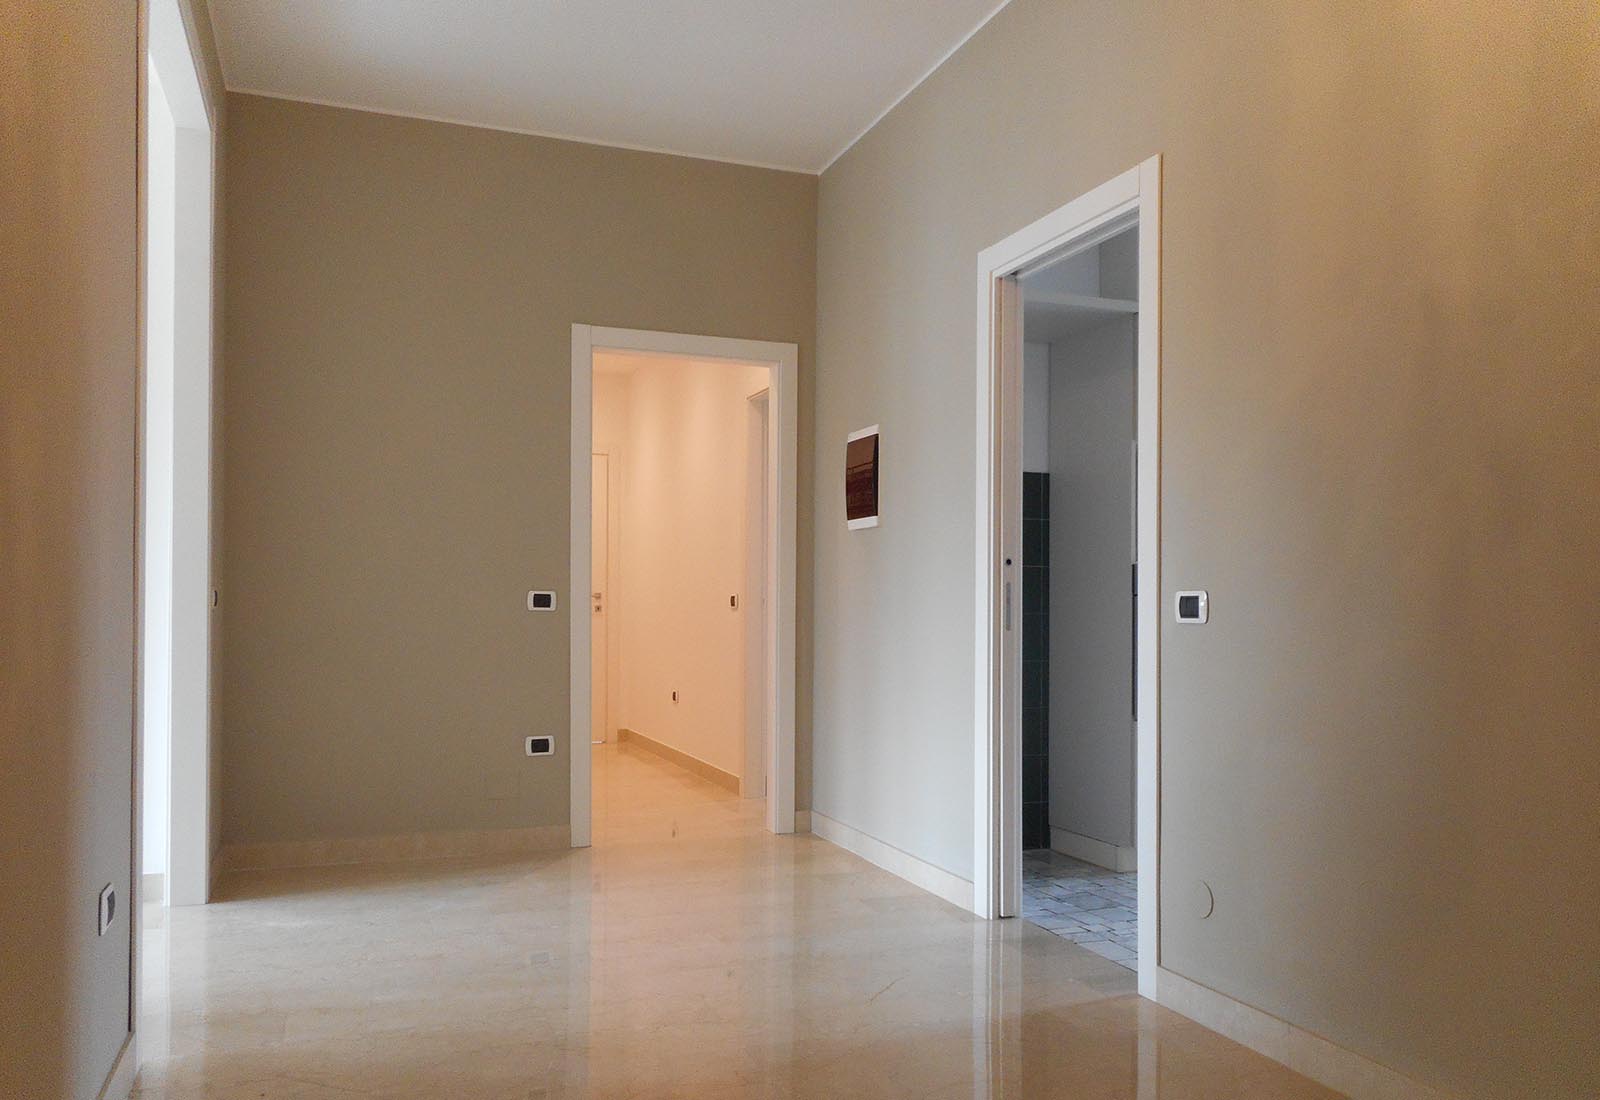 Apartment renovation in Rho - The hallway